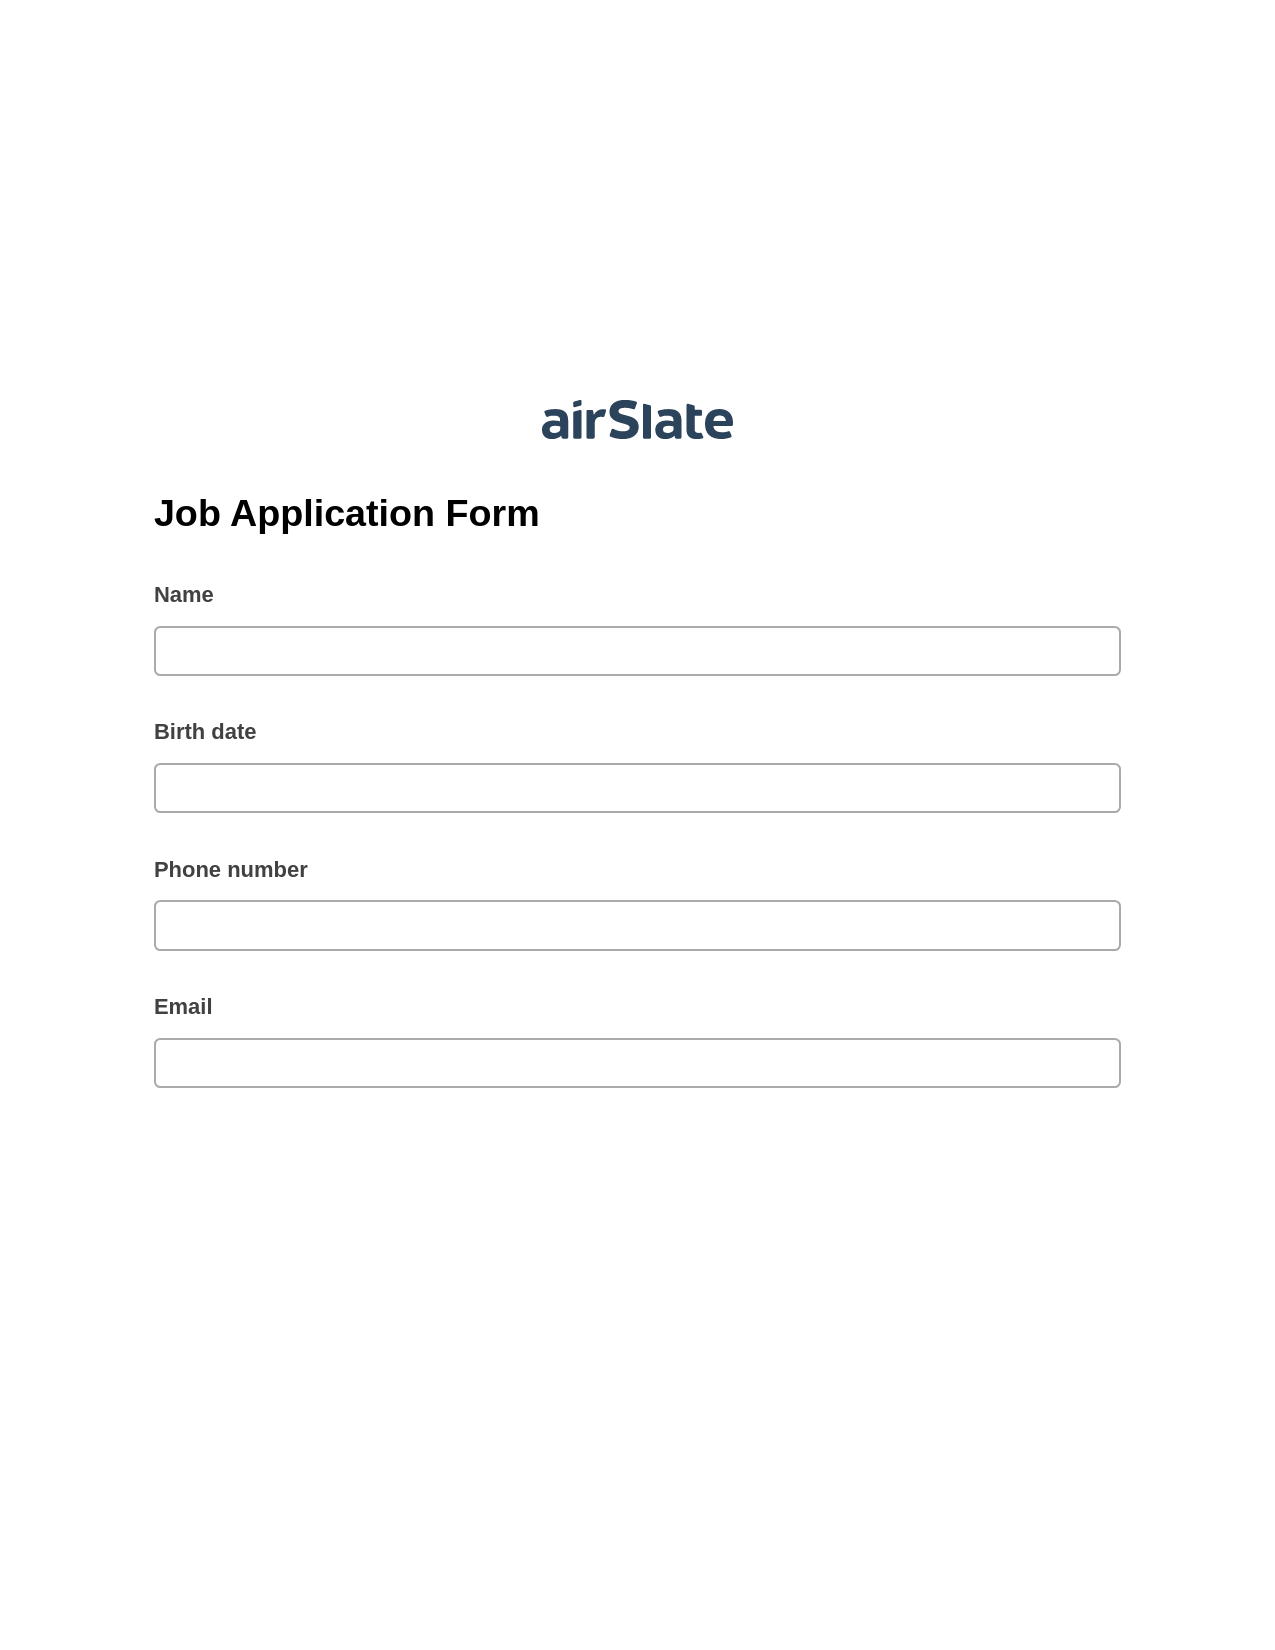 Job Application Form Pre-fill Dropdown from Airtable, Create NetSuite Records Bot, OneDrive Bot